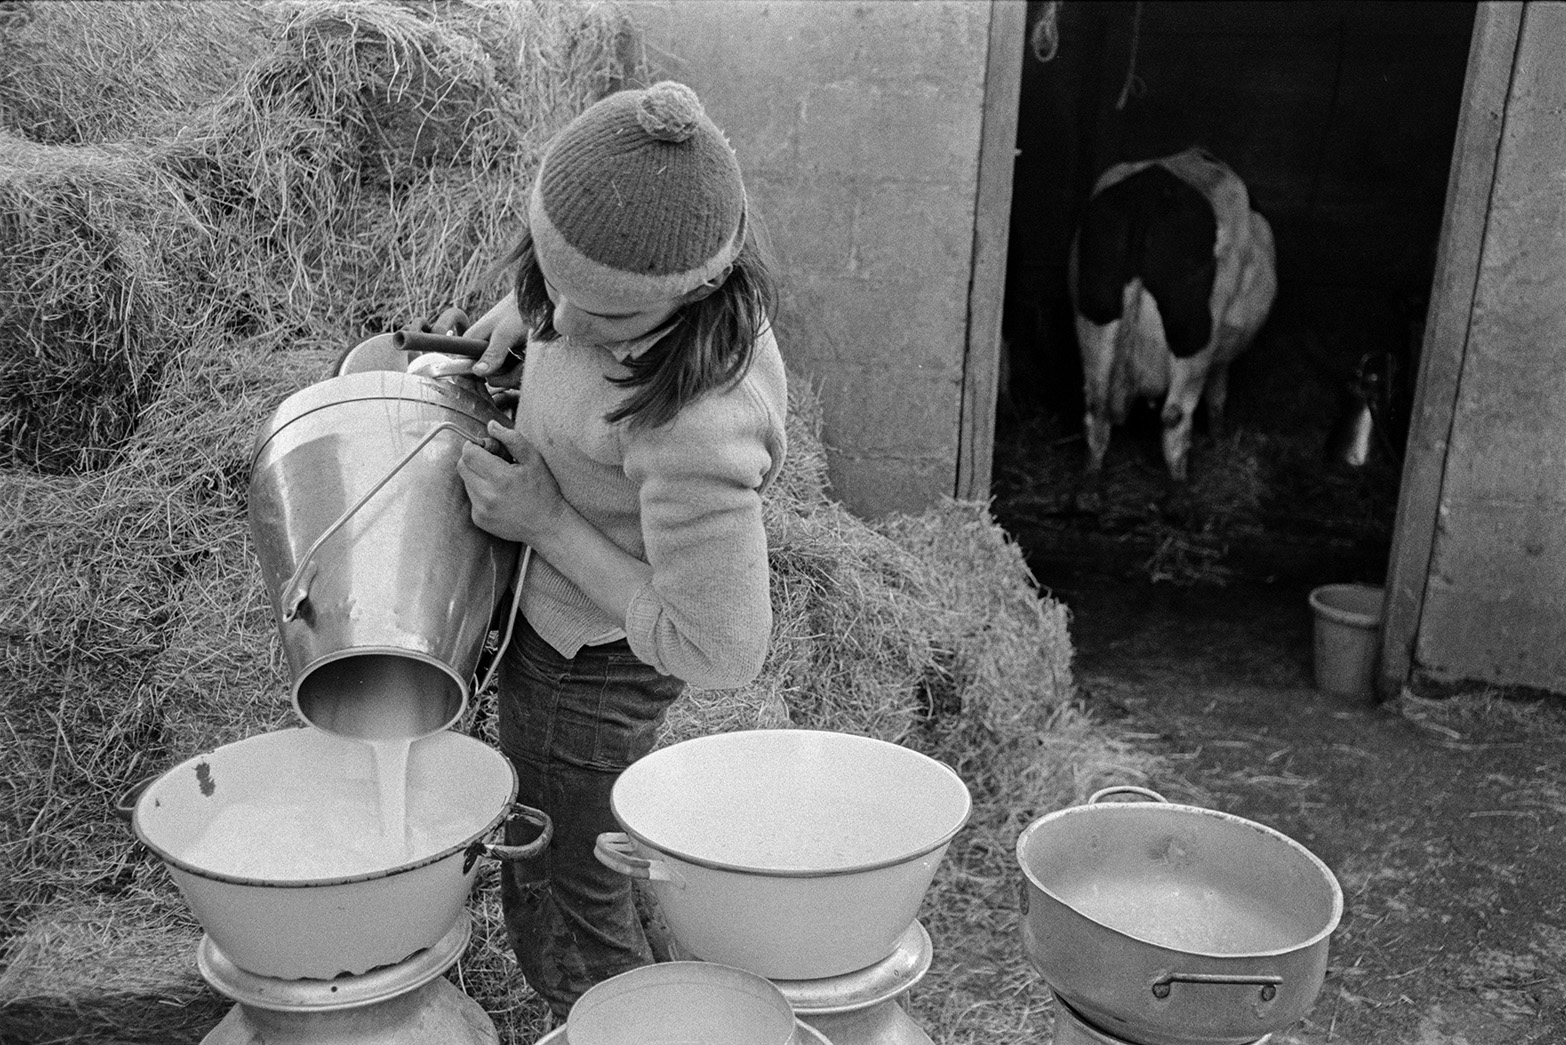 Derek Bright pouring milk into milk churns in the farmyard at Mill Road Farm, Beaford. Hay bales and a cow in a barn can be seen in the background. The farm was also known as Jeffrys.